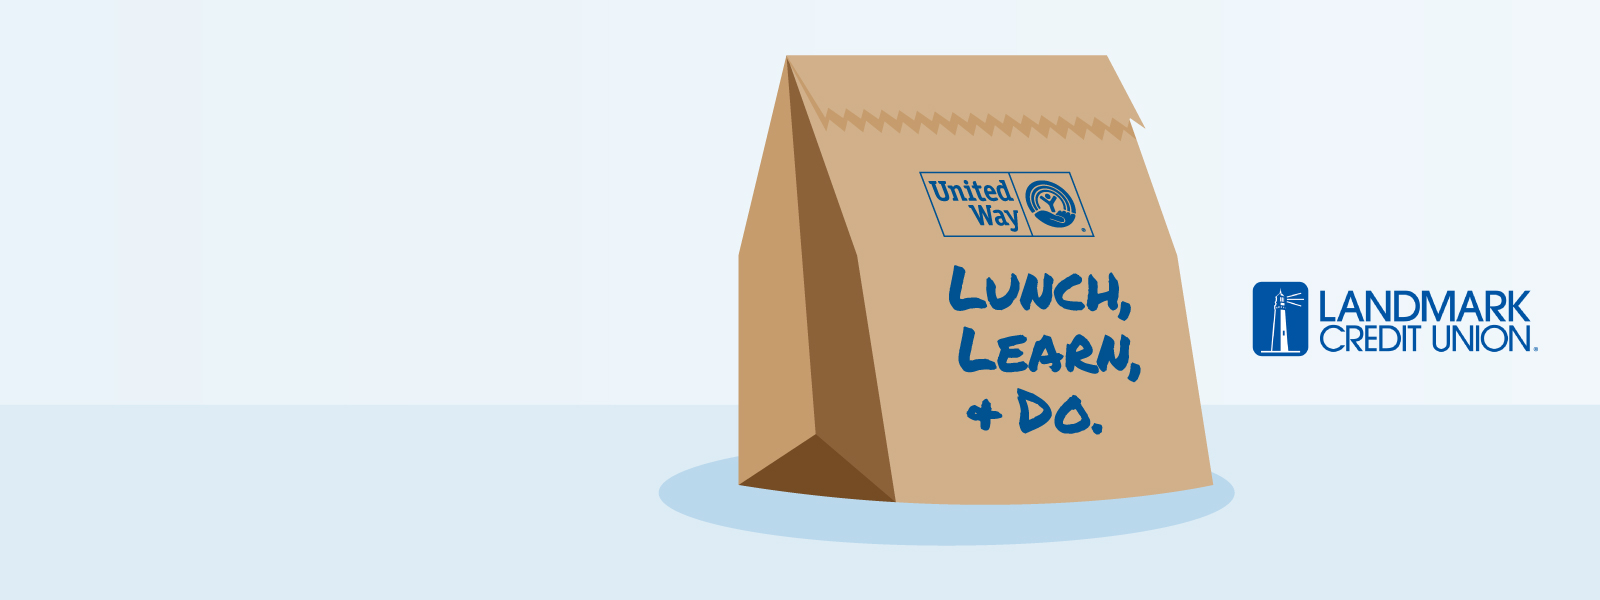 lunch bag vector image with word on it saying lunch, learn plus do